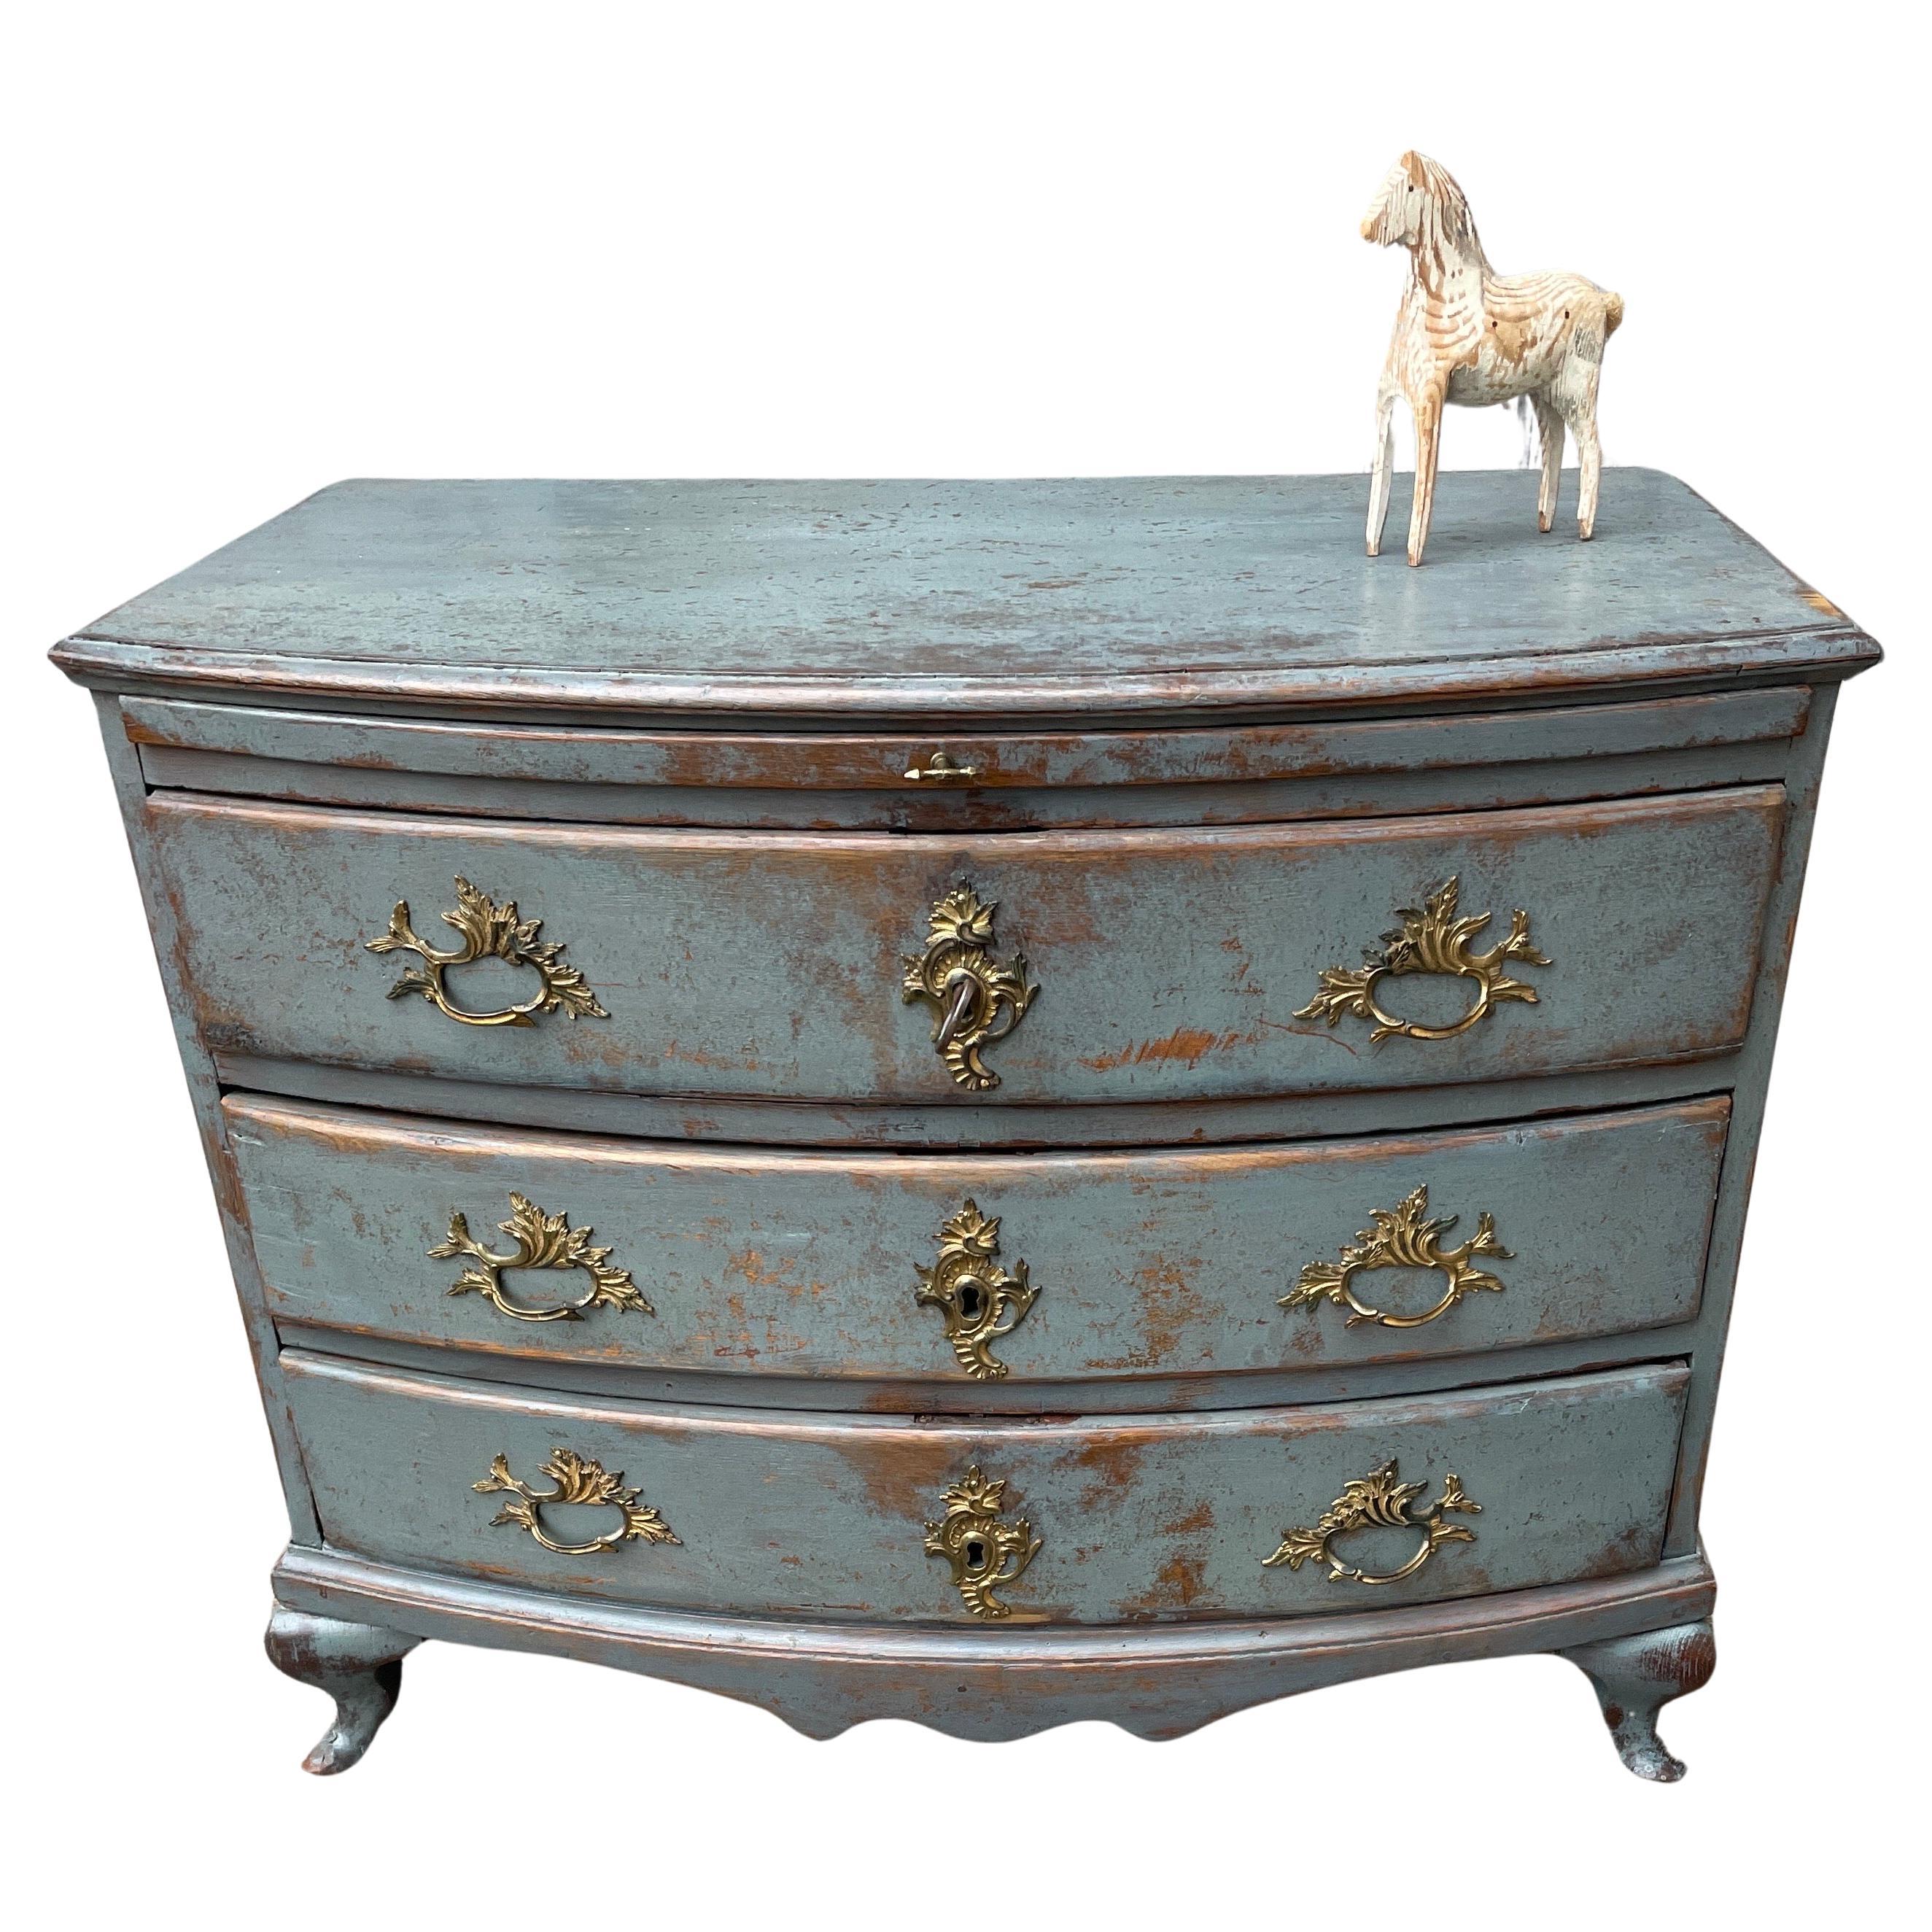 Swedish 18th Century Blue Painted Baroque Chest of Drawers